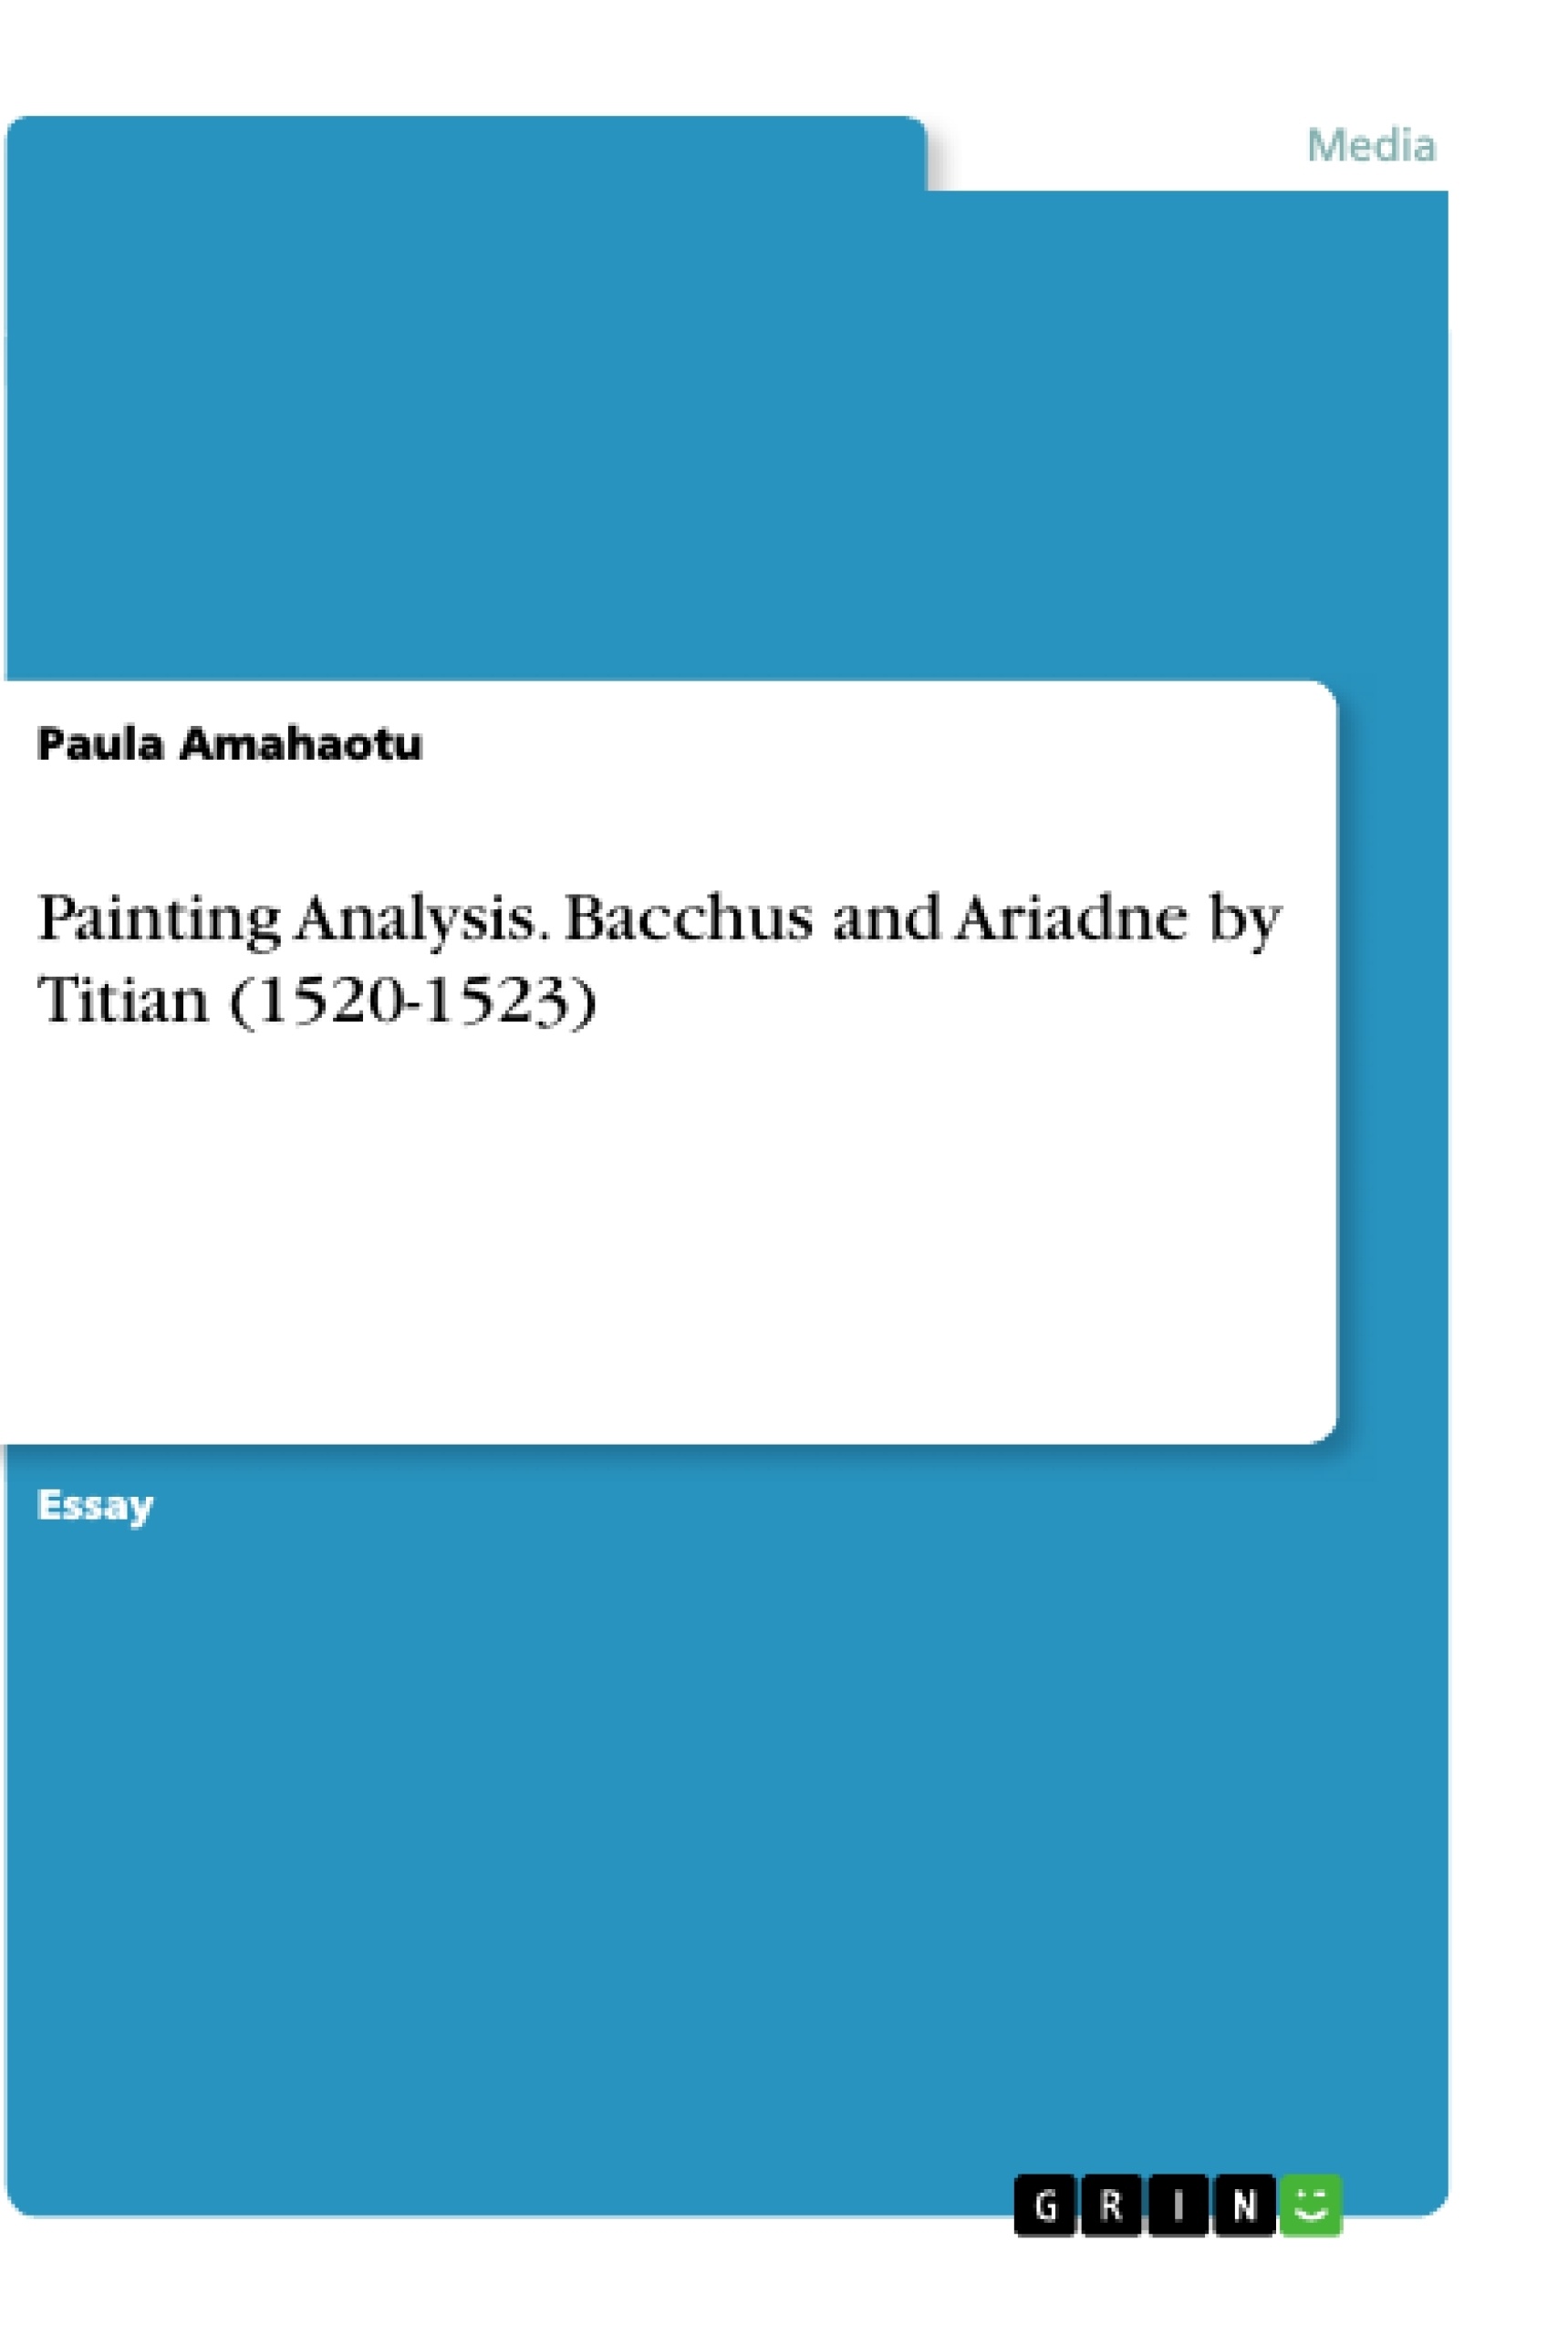 Titre: Painting Analysis. Bacchus and Ariadne by Titian (1520-1523)